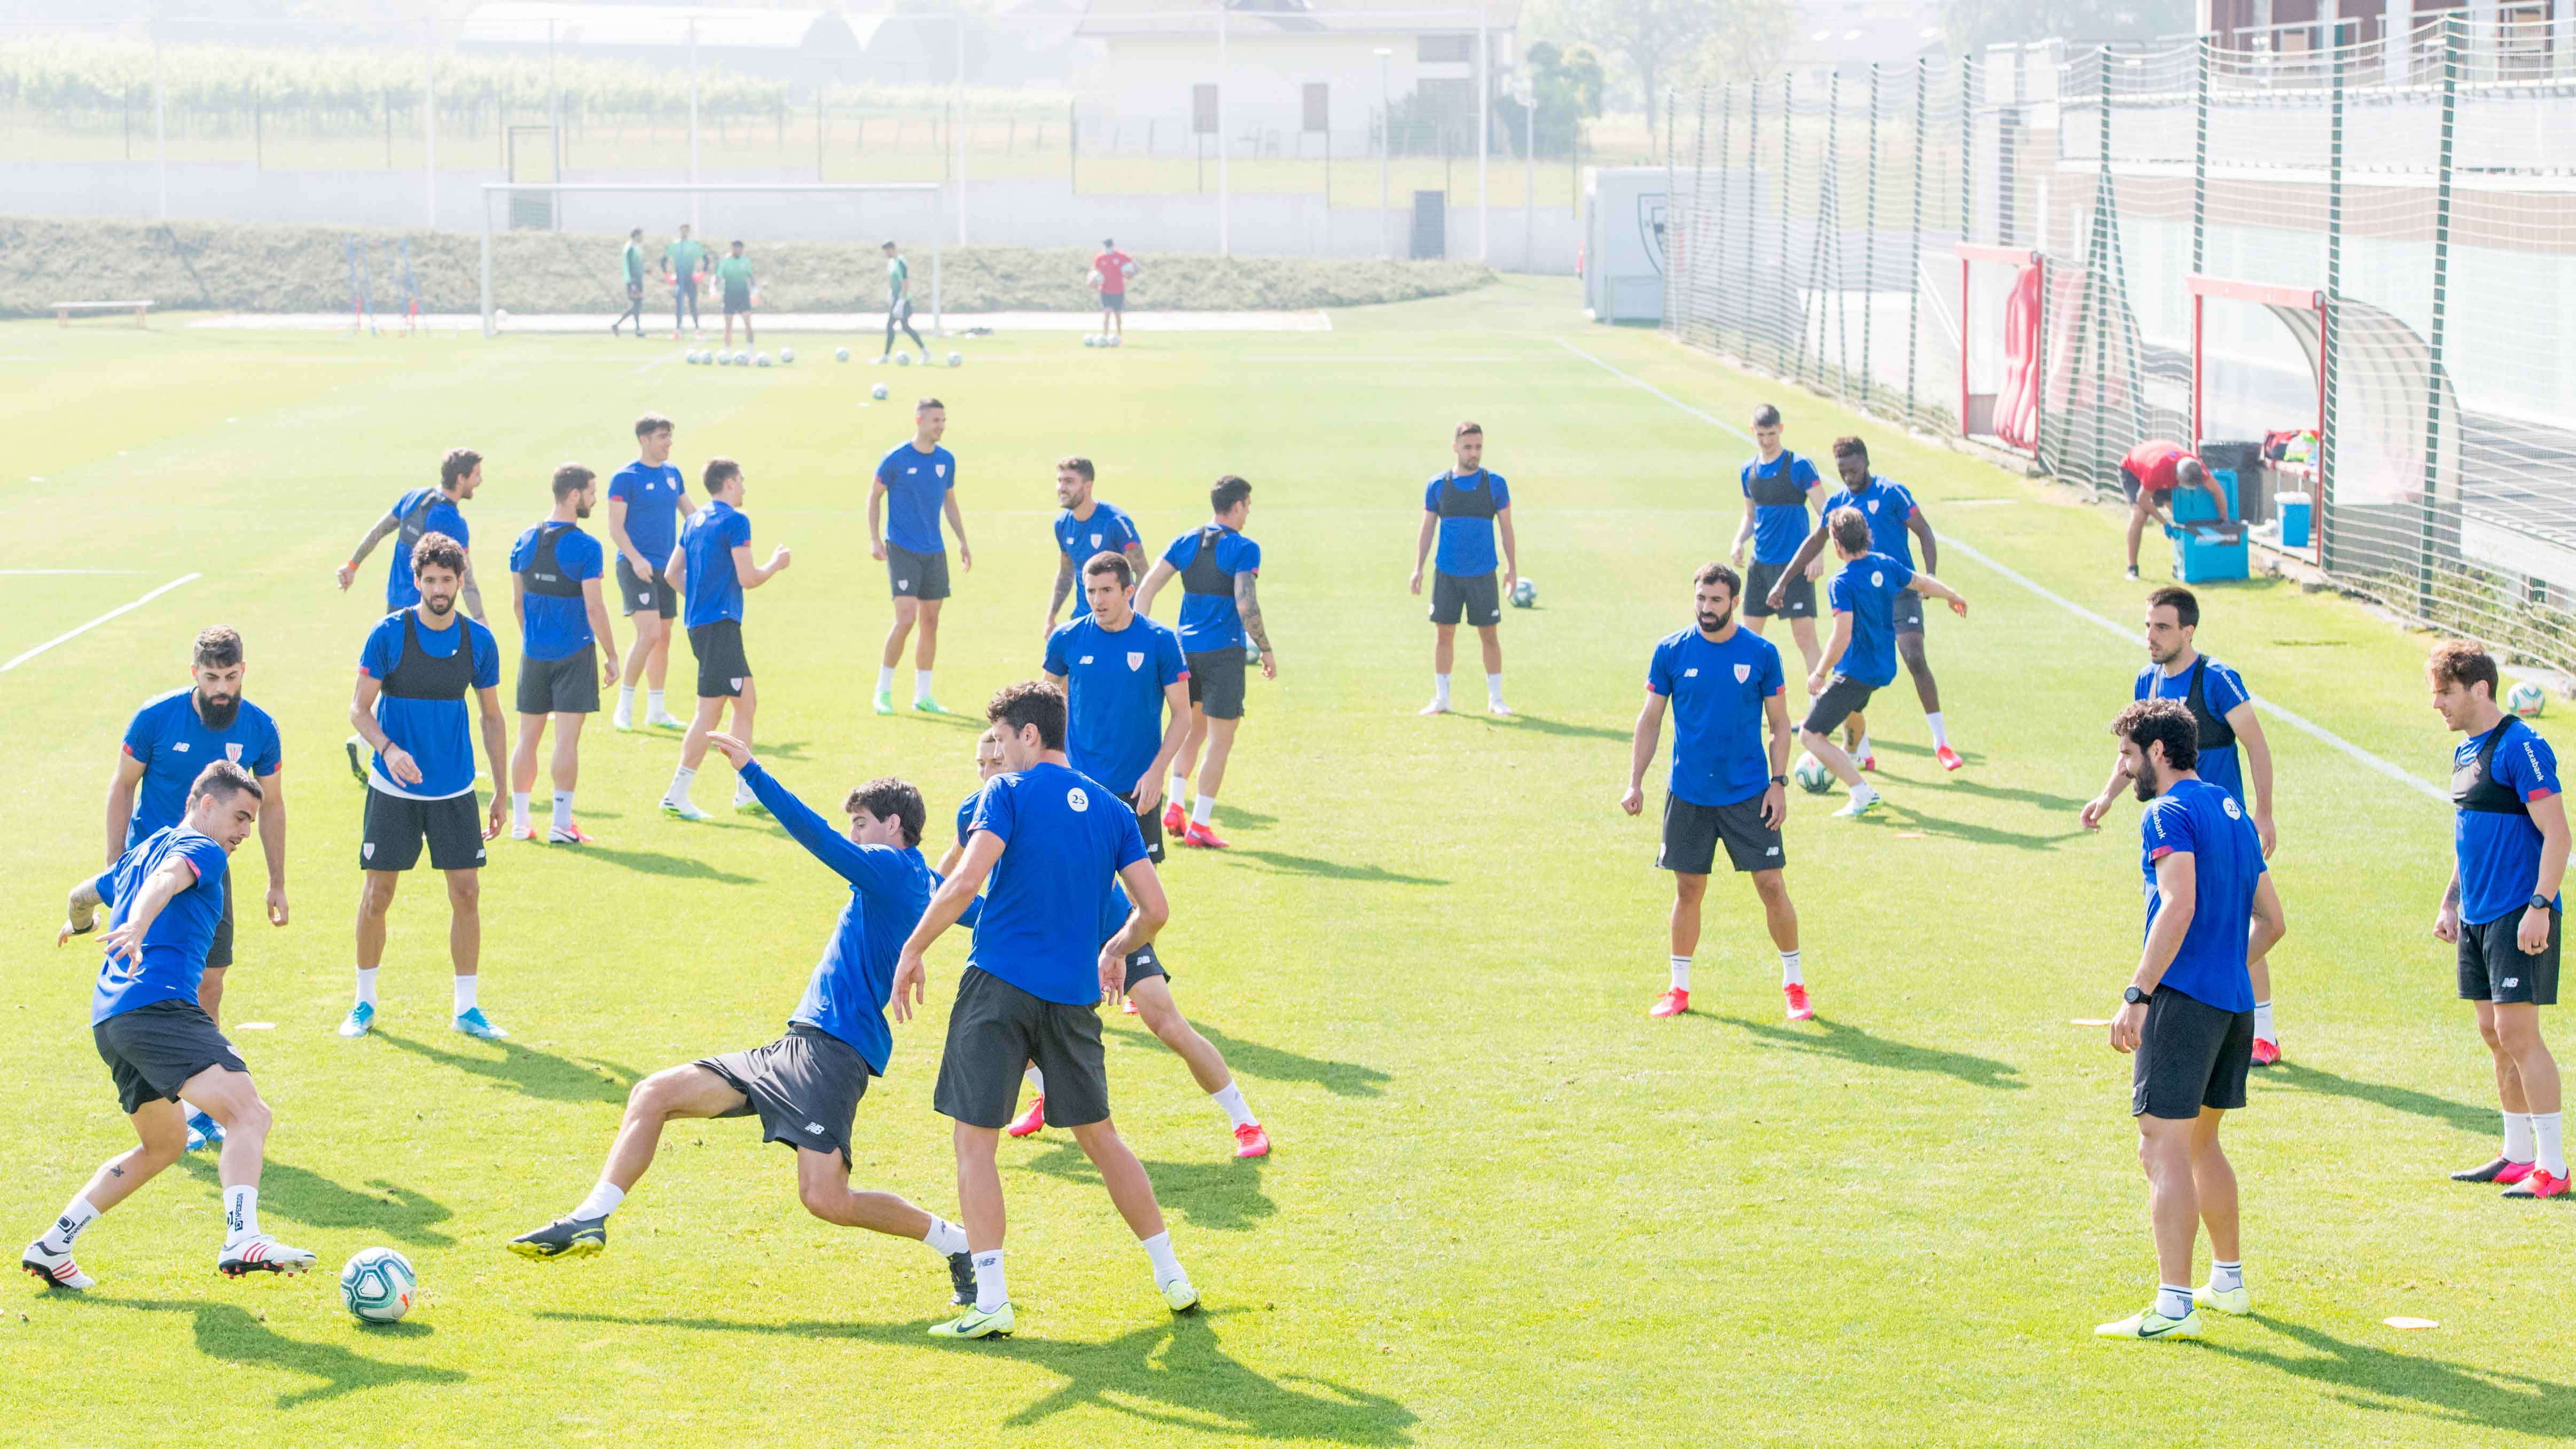 Pictures of this Tuesday’s training session